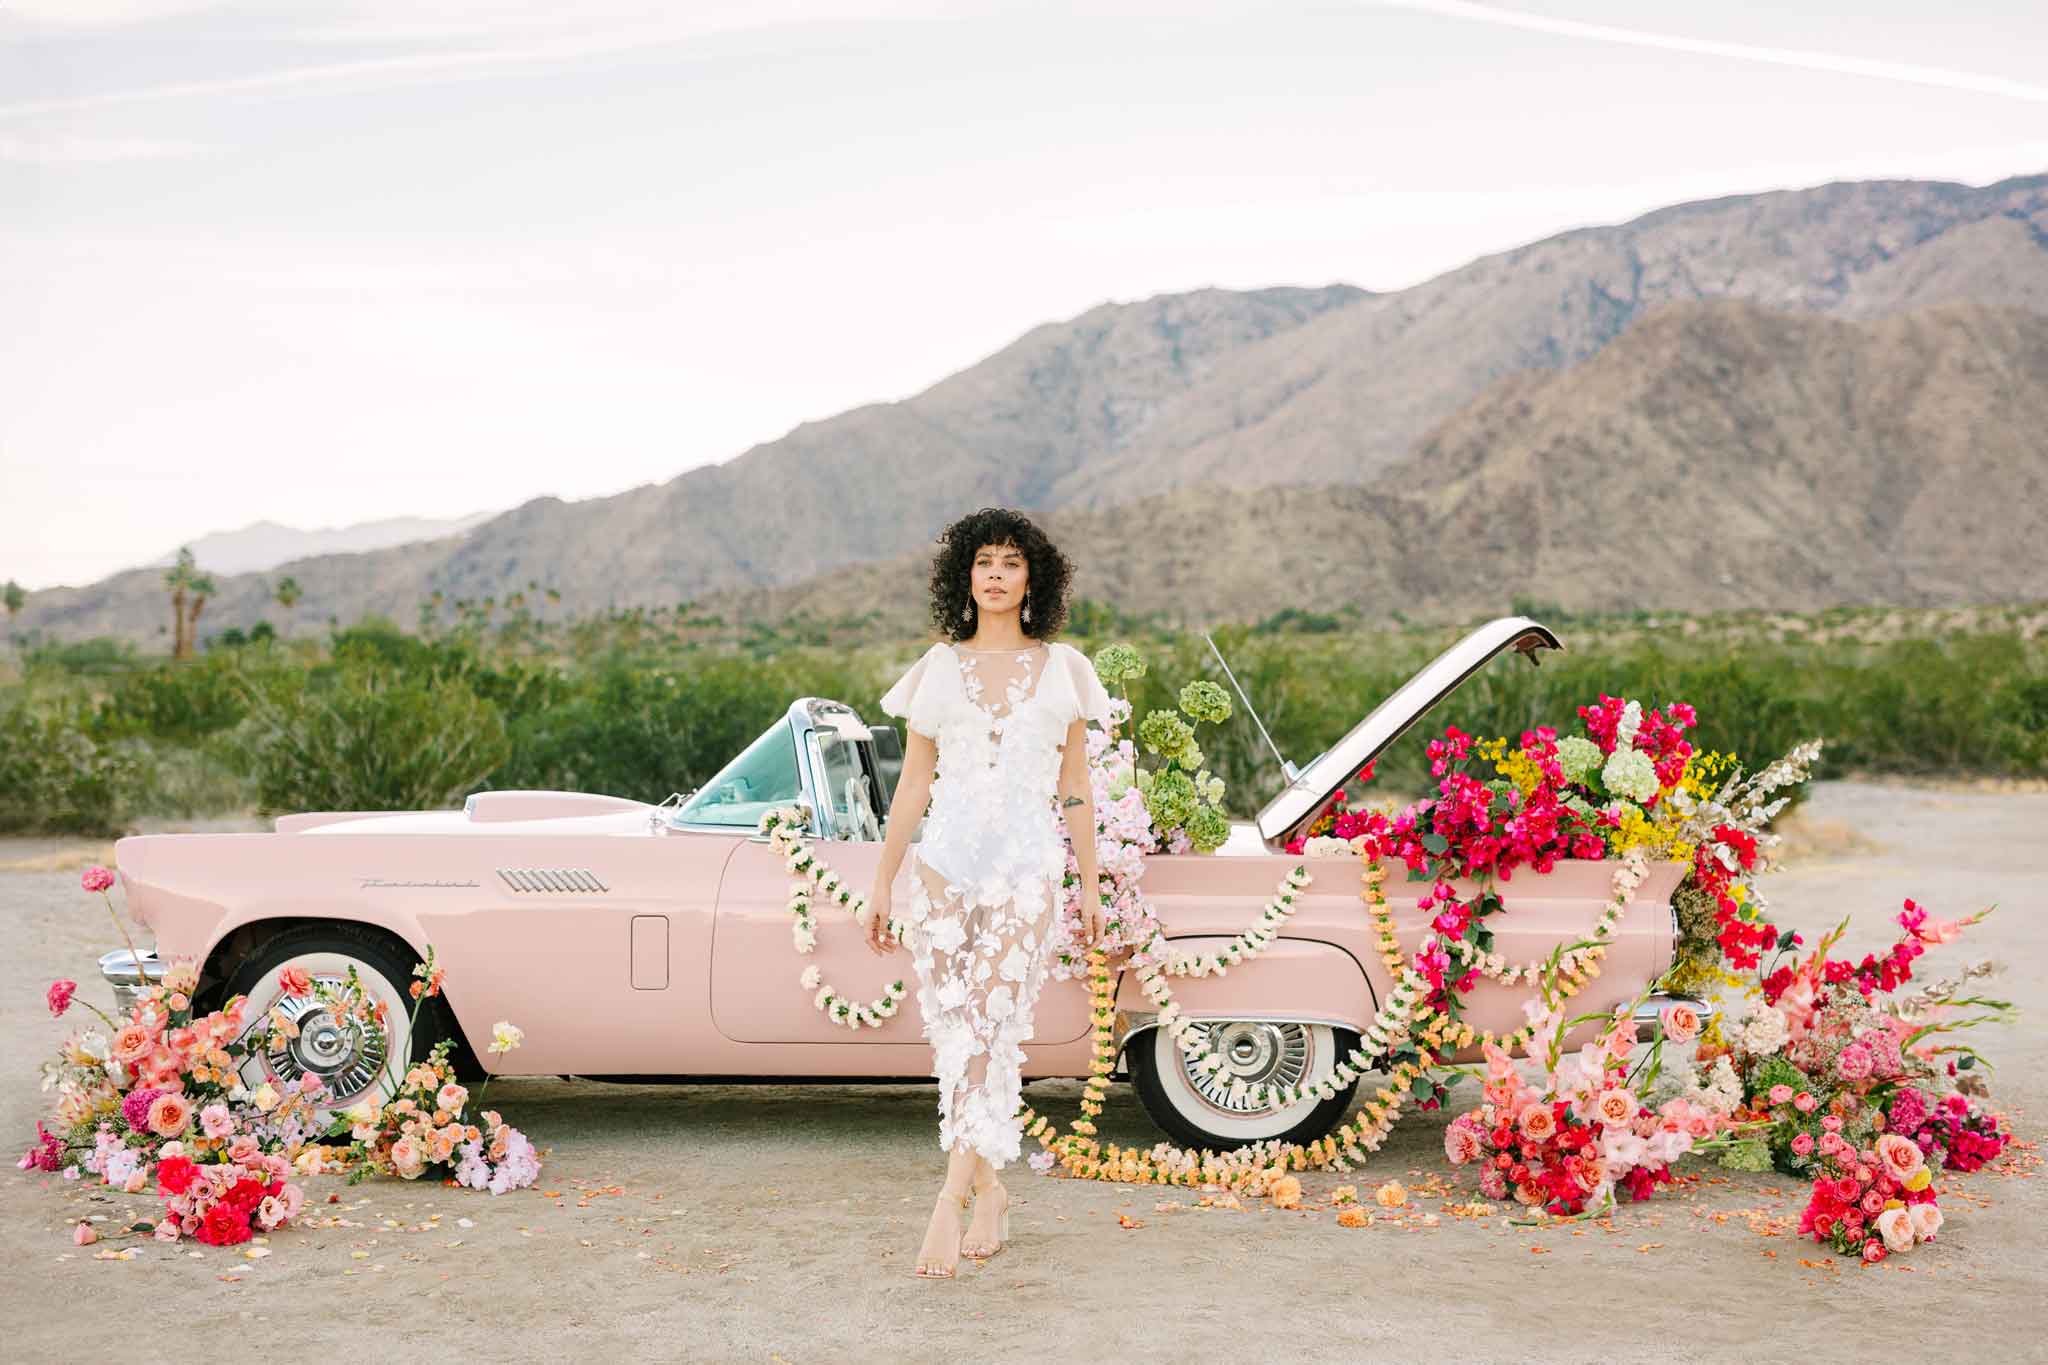 Palm Springs inspired car photoshoot with flowers